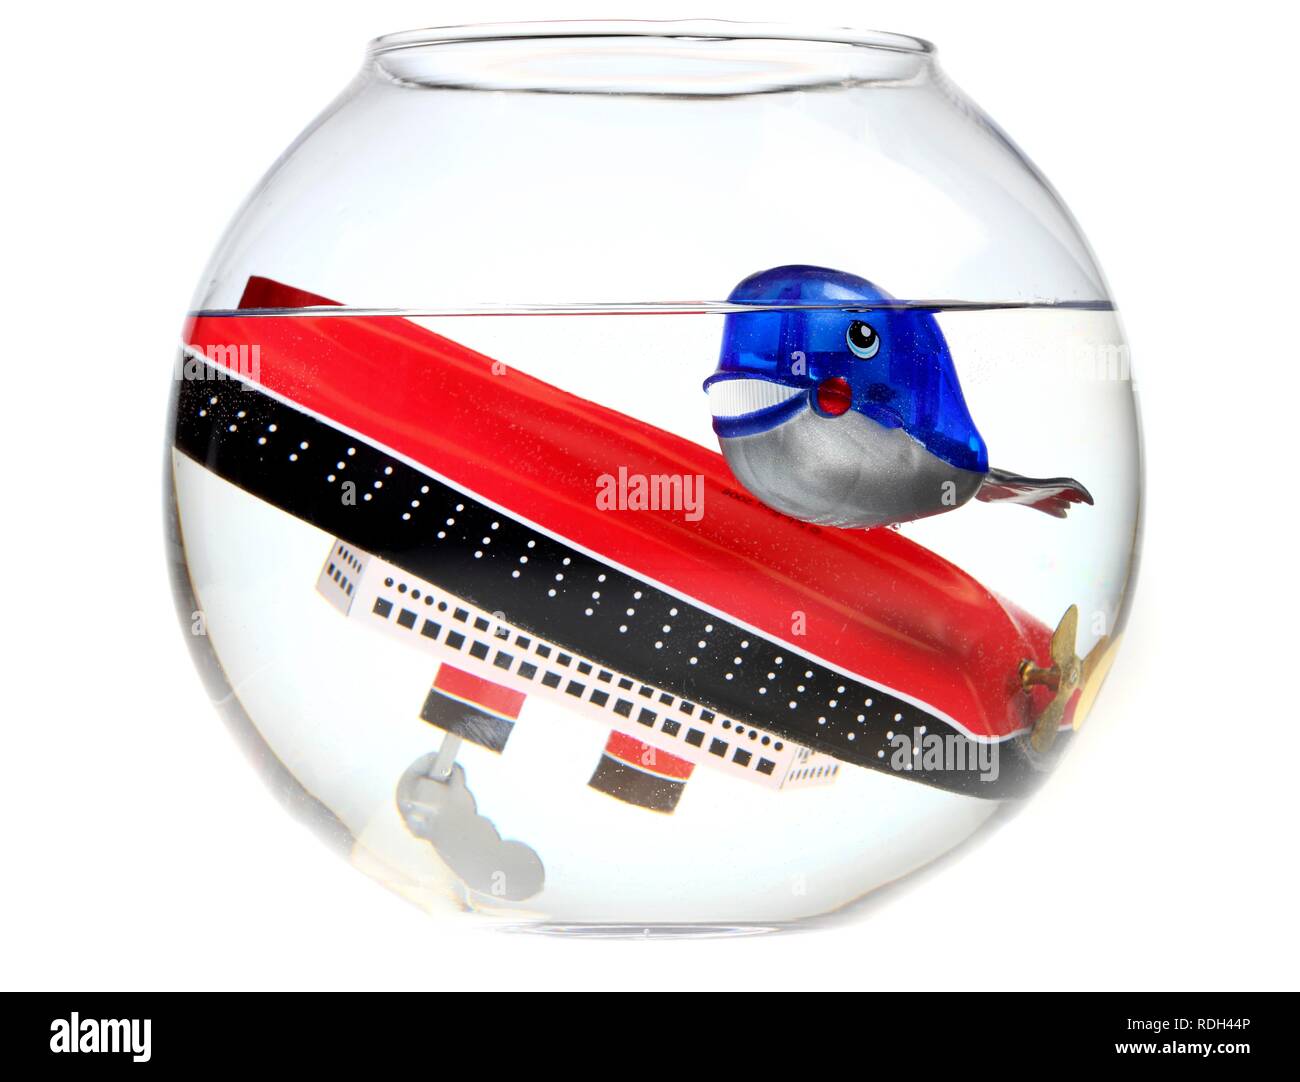 Wind-up toy whale and a sunken toy cruise ship in a fish bowl, illustration Stock Photo